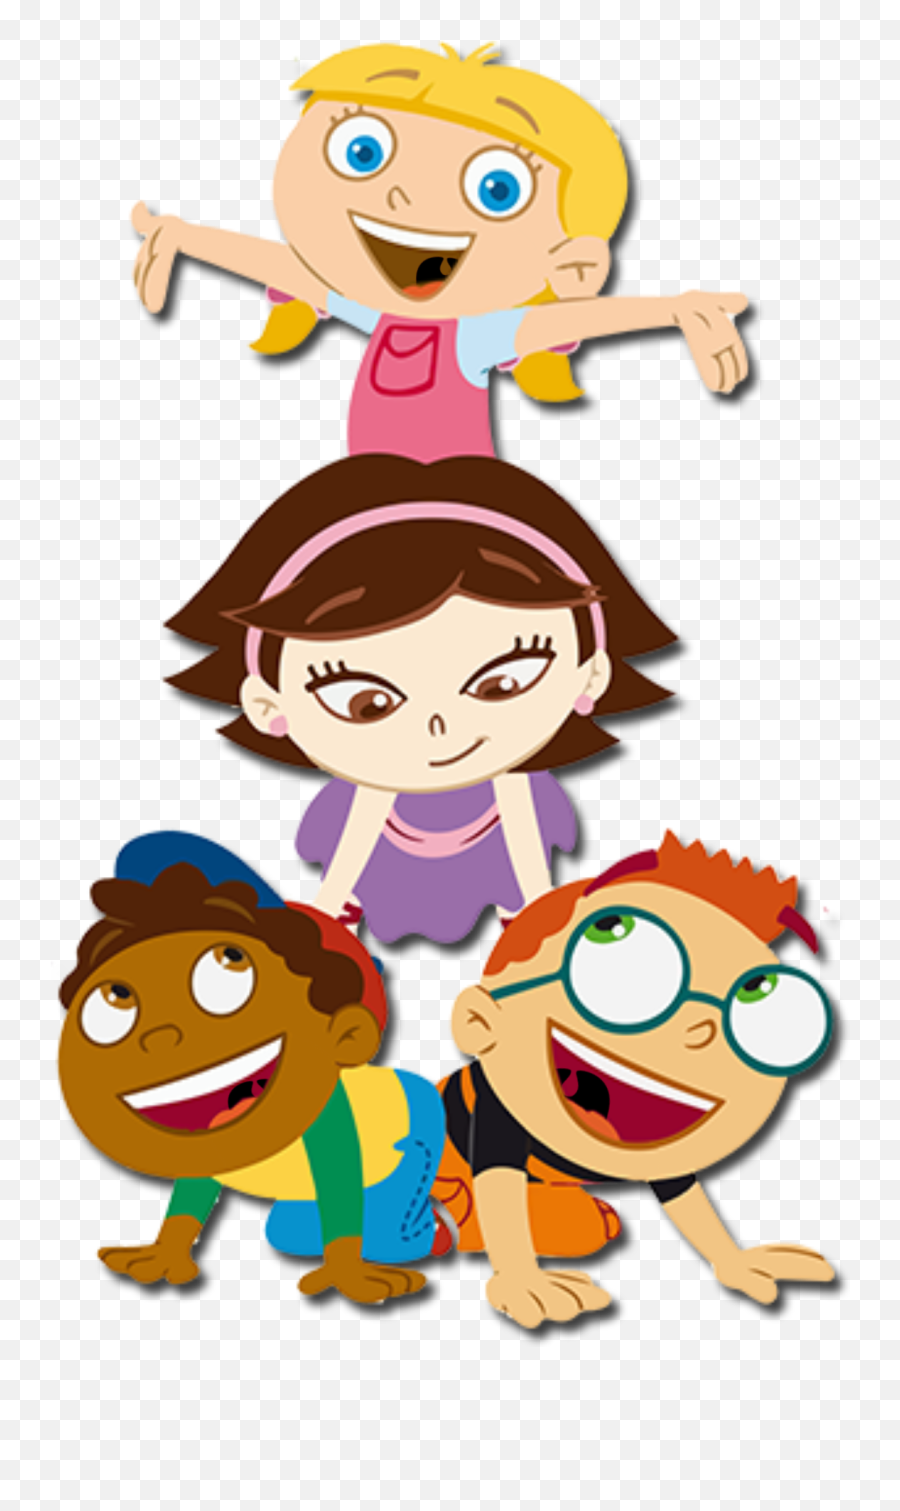 Pin On Ideas For The House Emoji,Fairly Oddparents Emotion Commotion